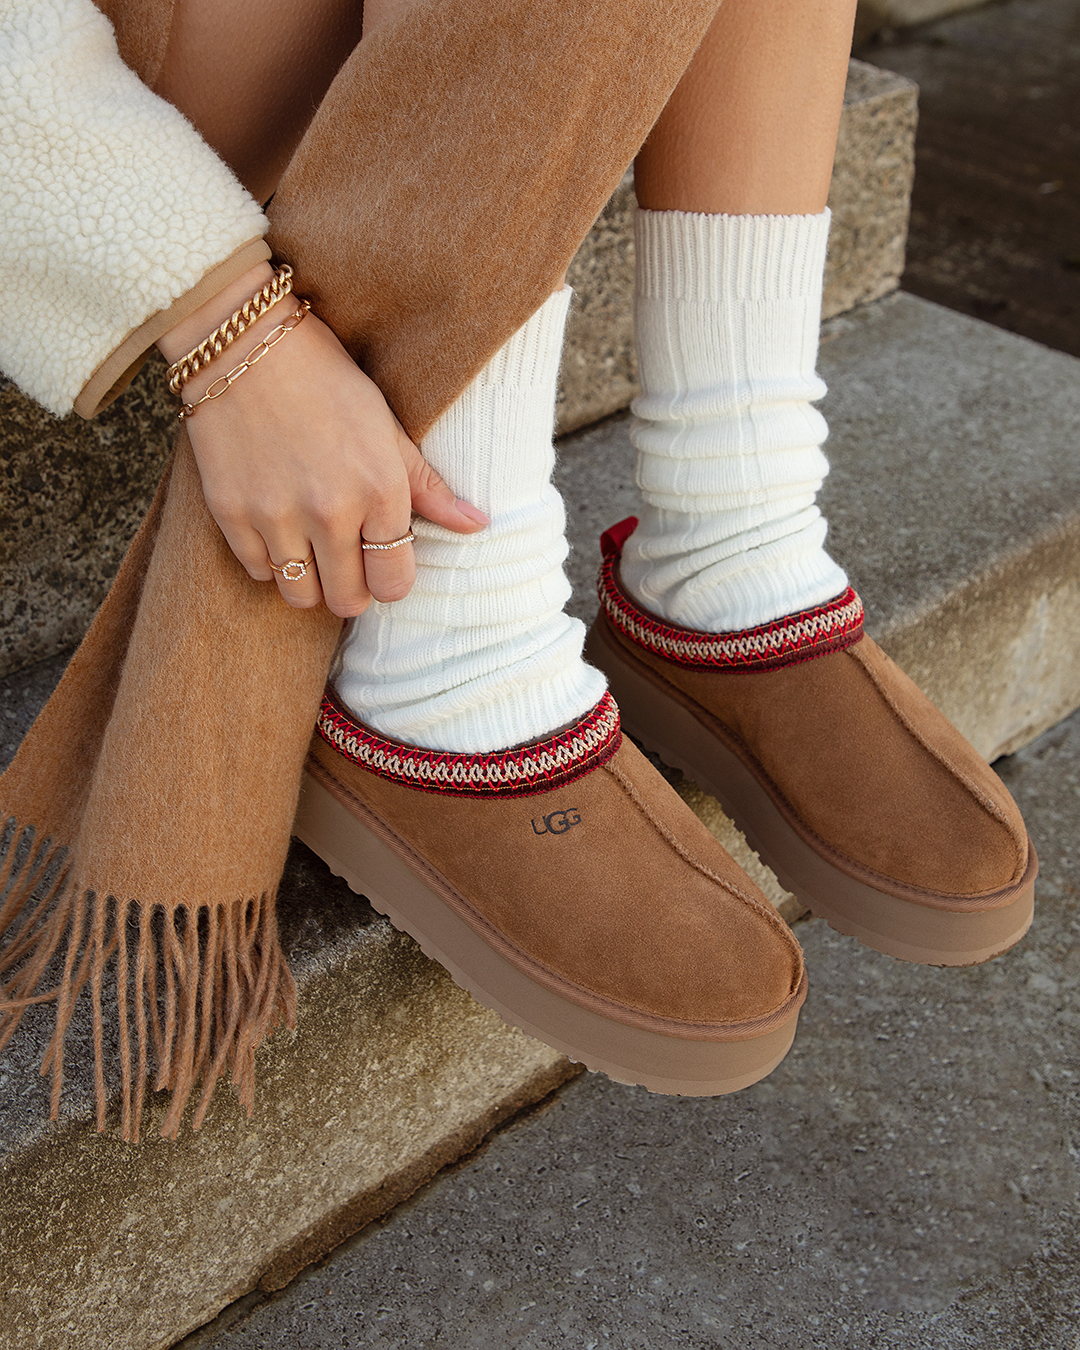 UGG Slippers with white socks